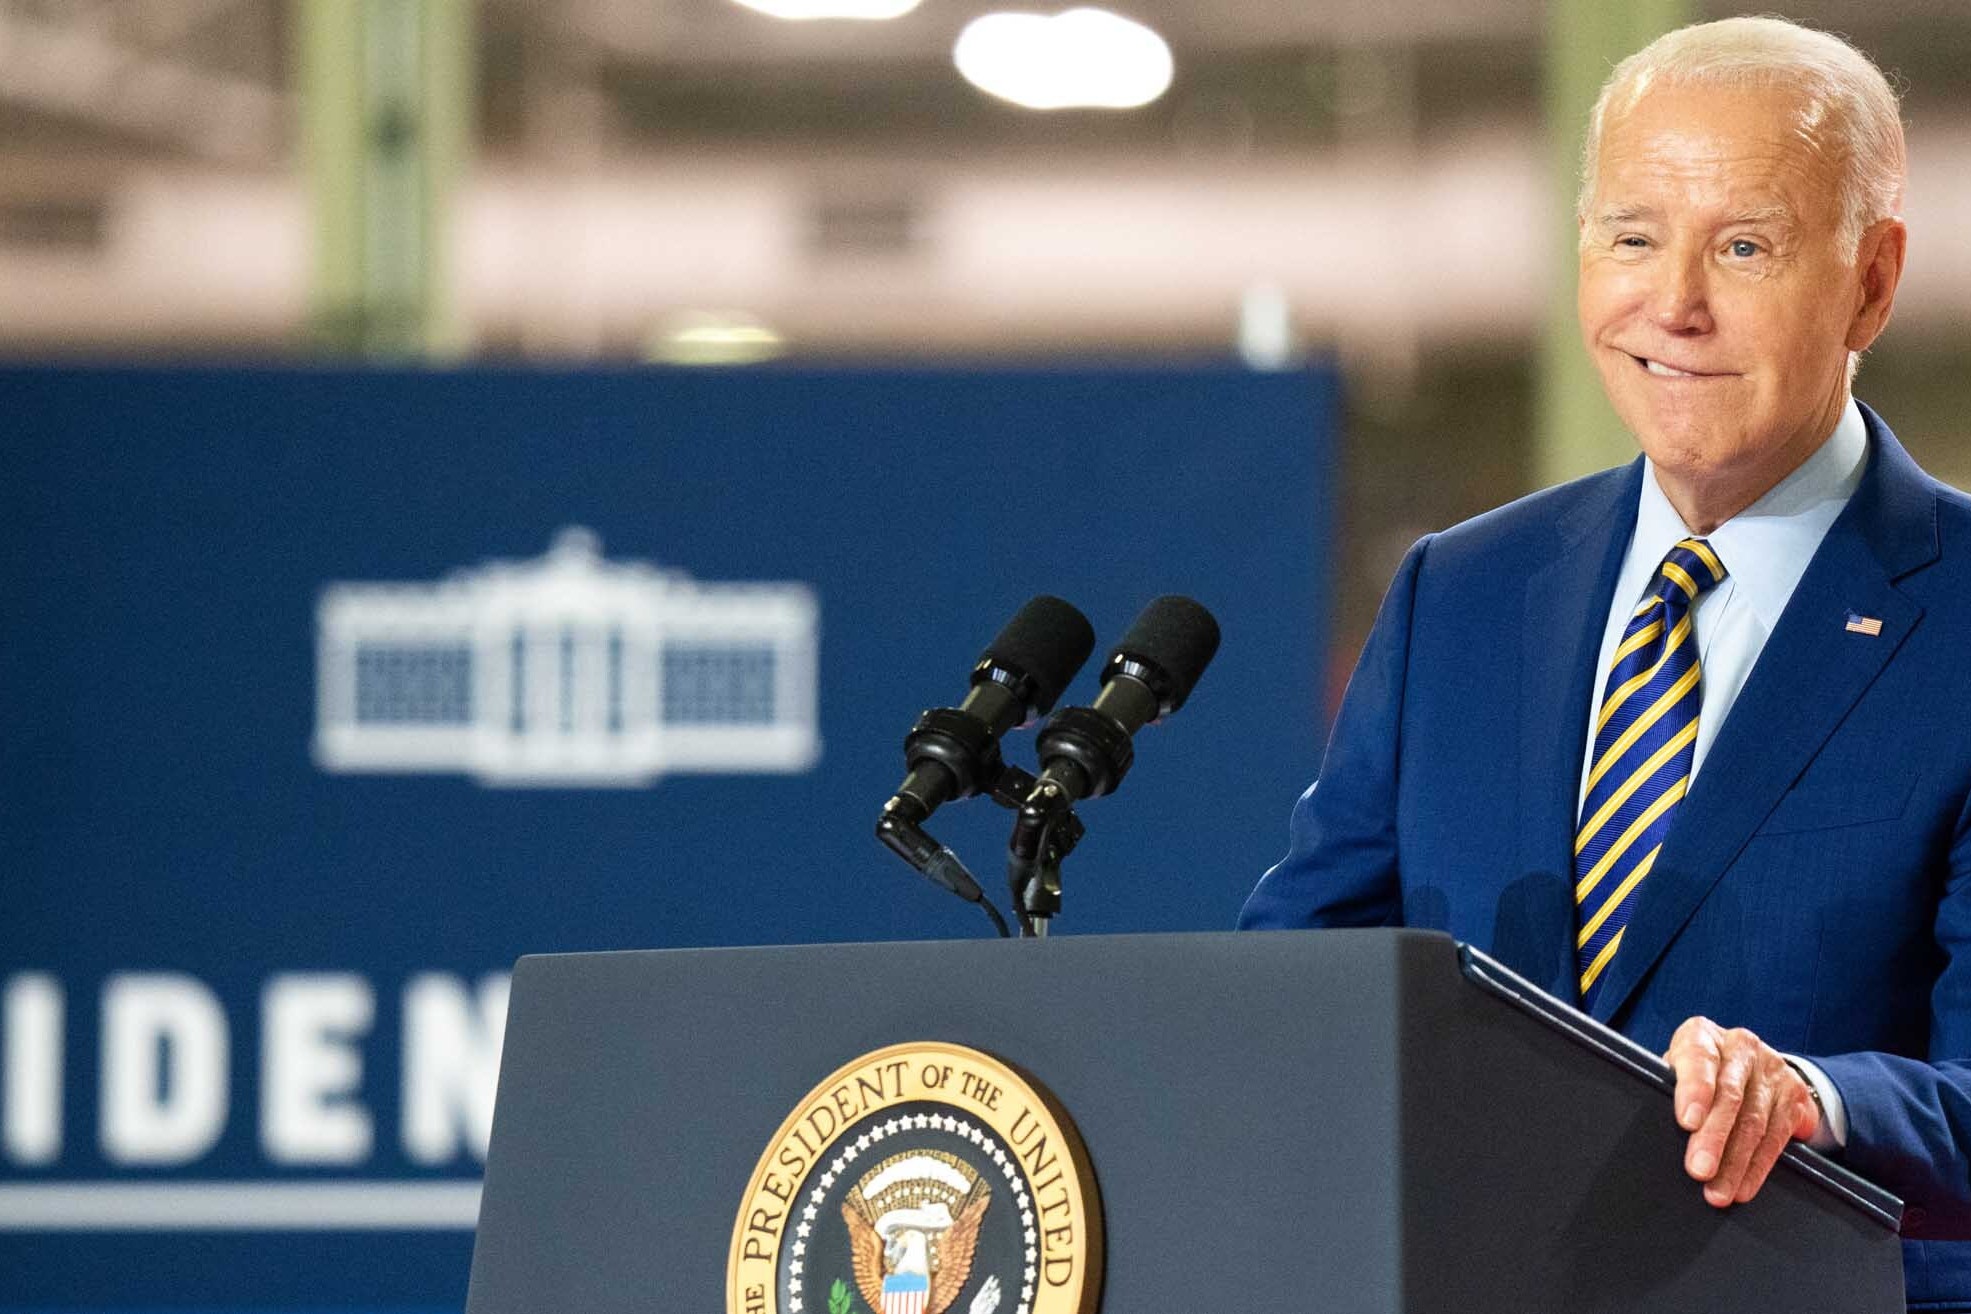 President Joe Biden speaks about his economic plan at the Flex LTD manufacturing plant on July 6, 2023 in West Columbia, South Carolina.